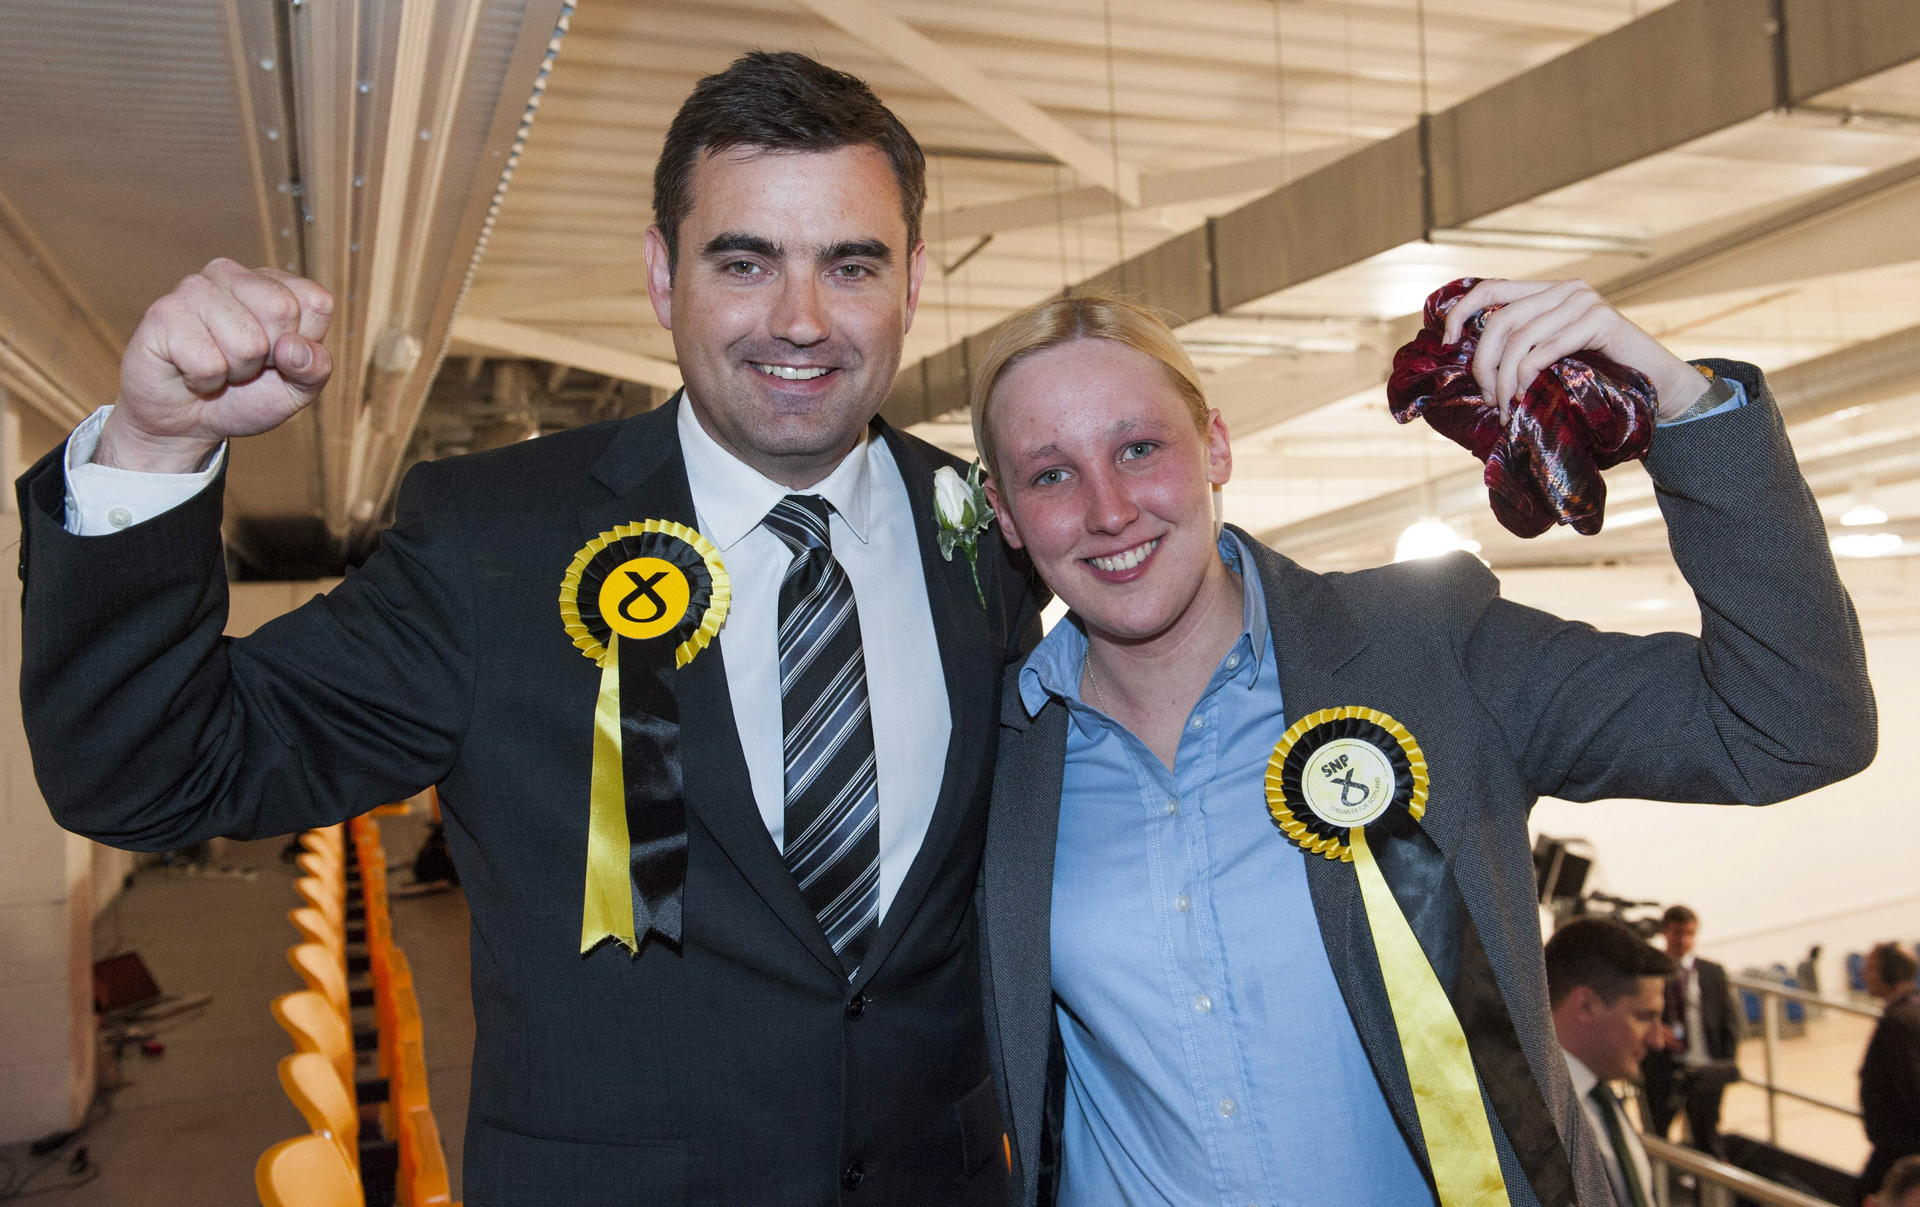 Scottish National Party member Mhairi Black (right) with another newly elected member of parliament, Gavin Newlands. Photo: AFP